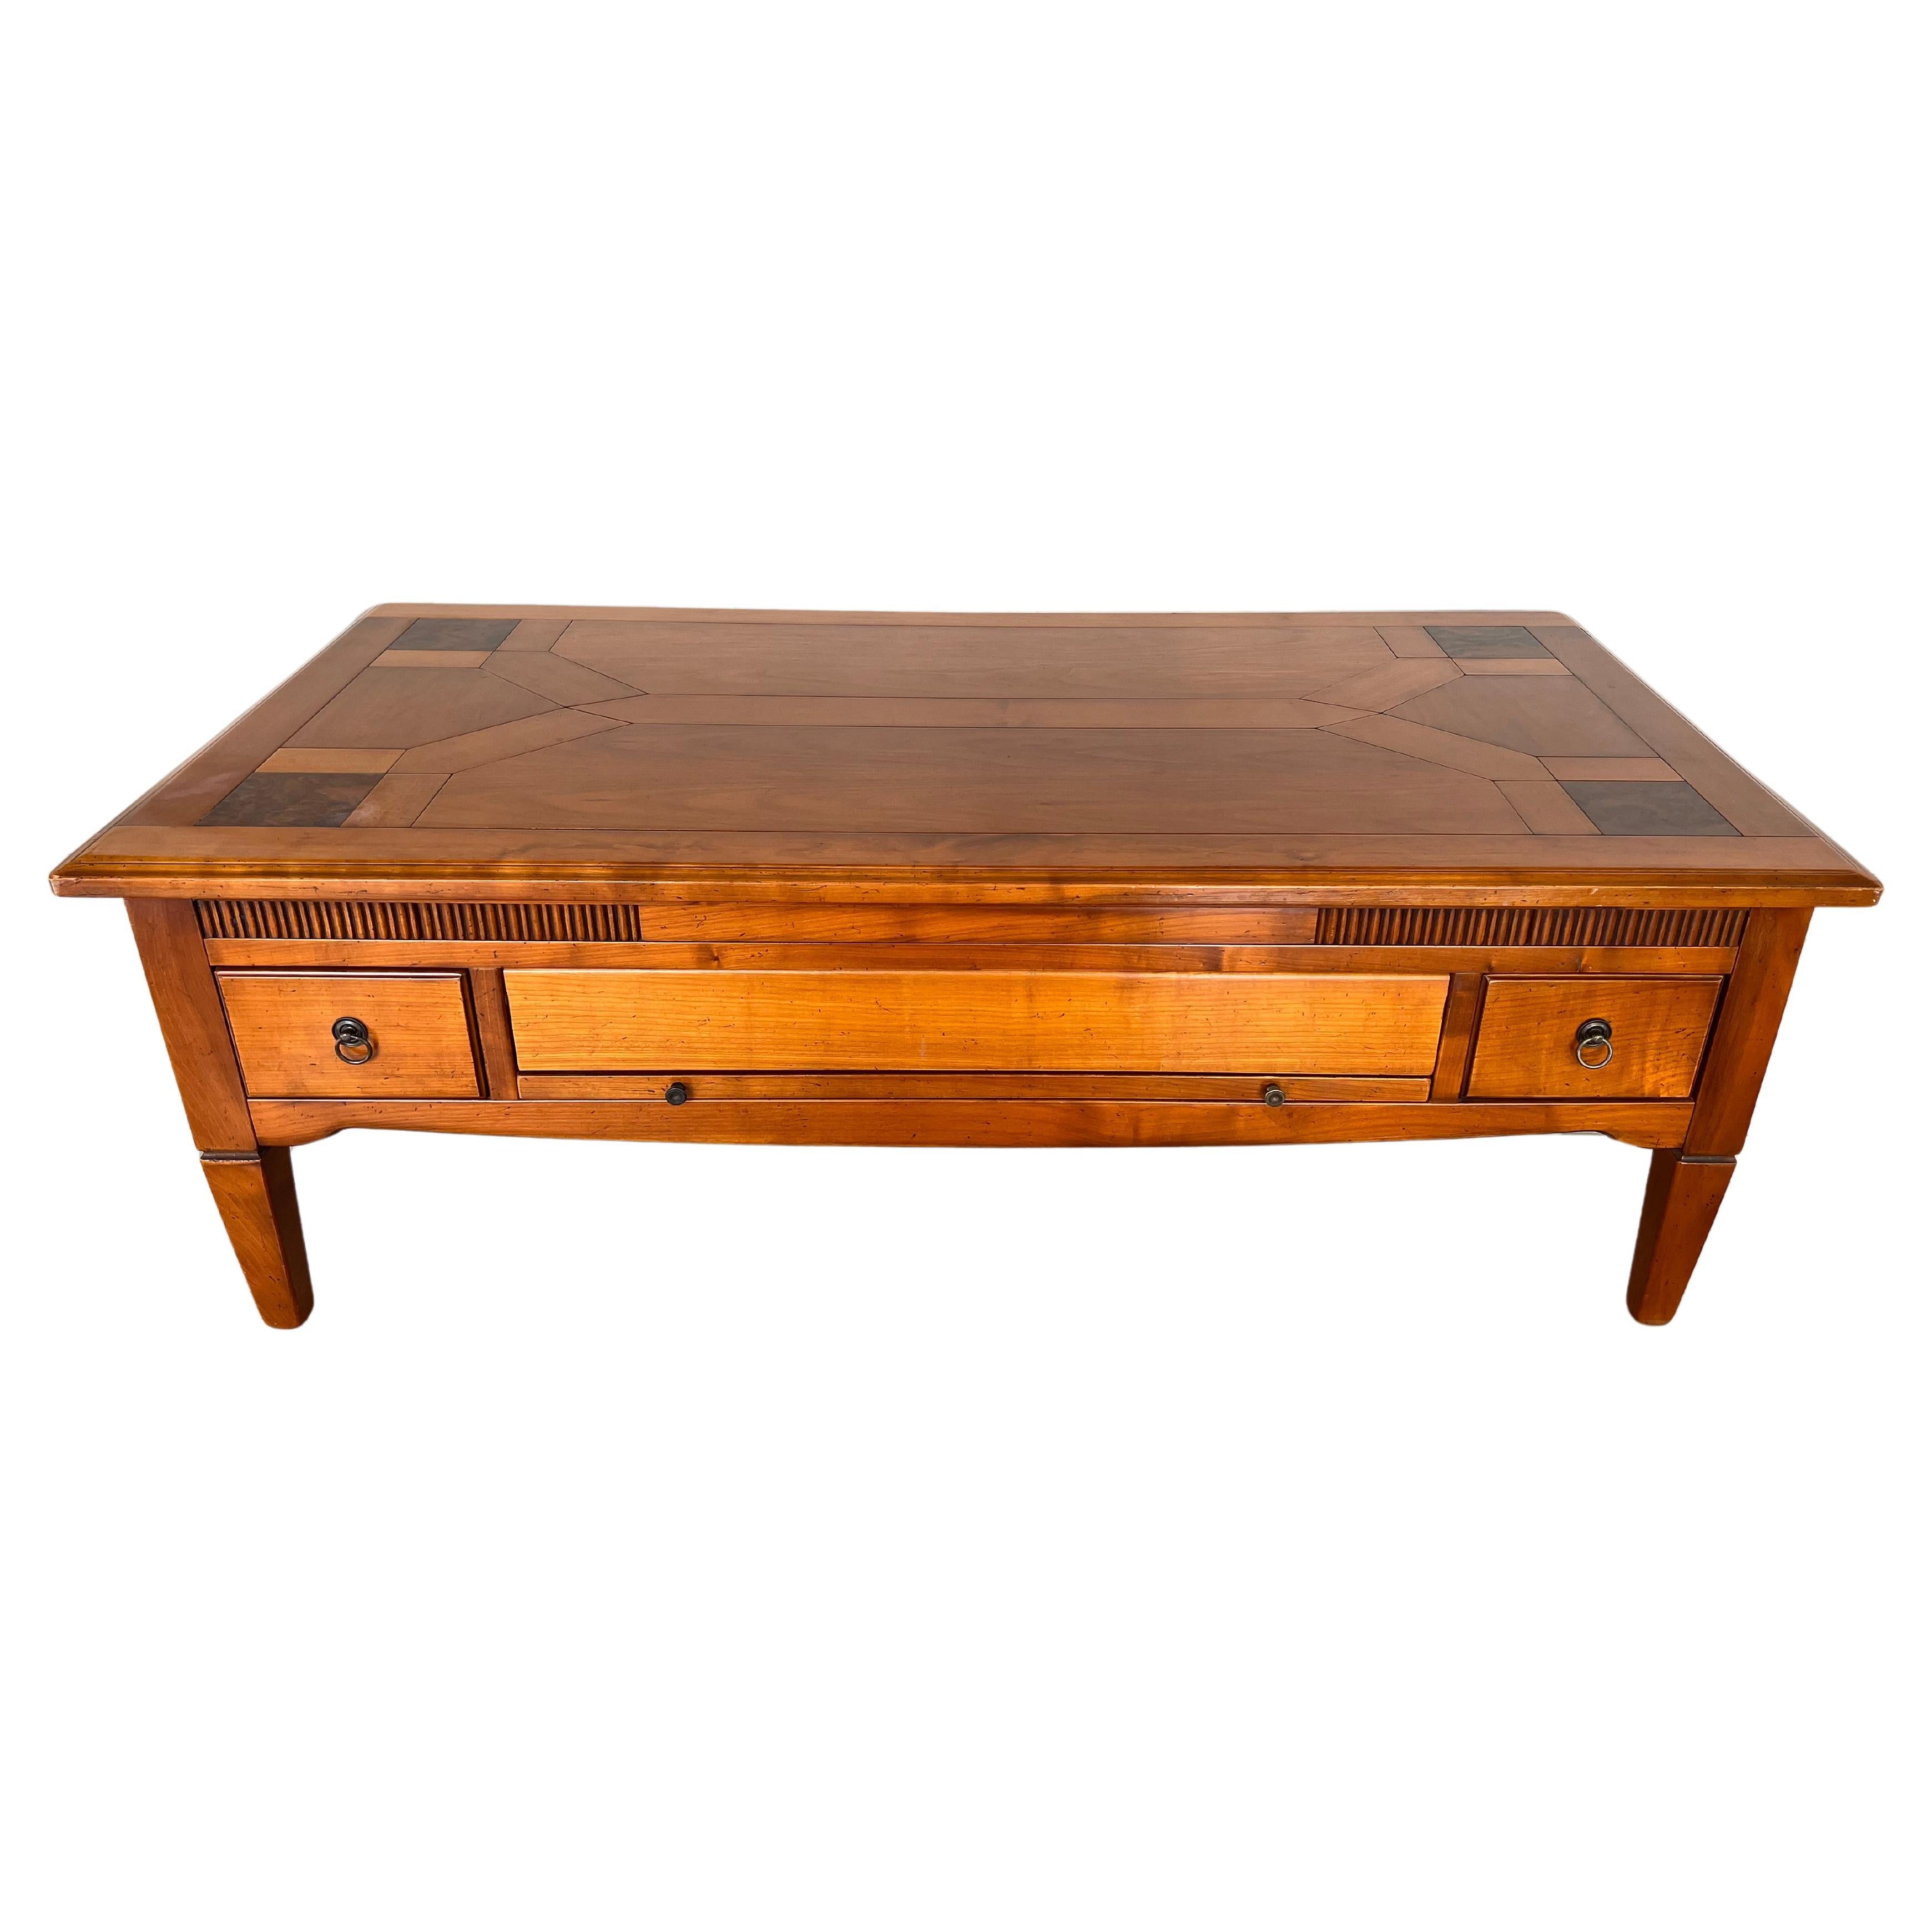 French Colonial Mid-Century Modern Style Coffee Table With Drawers